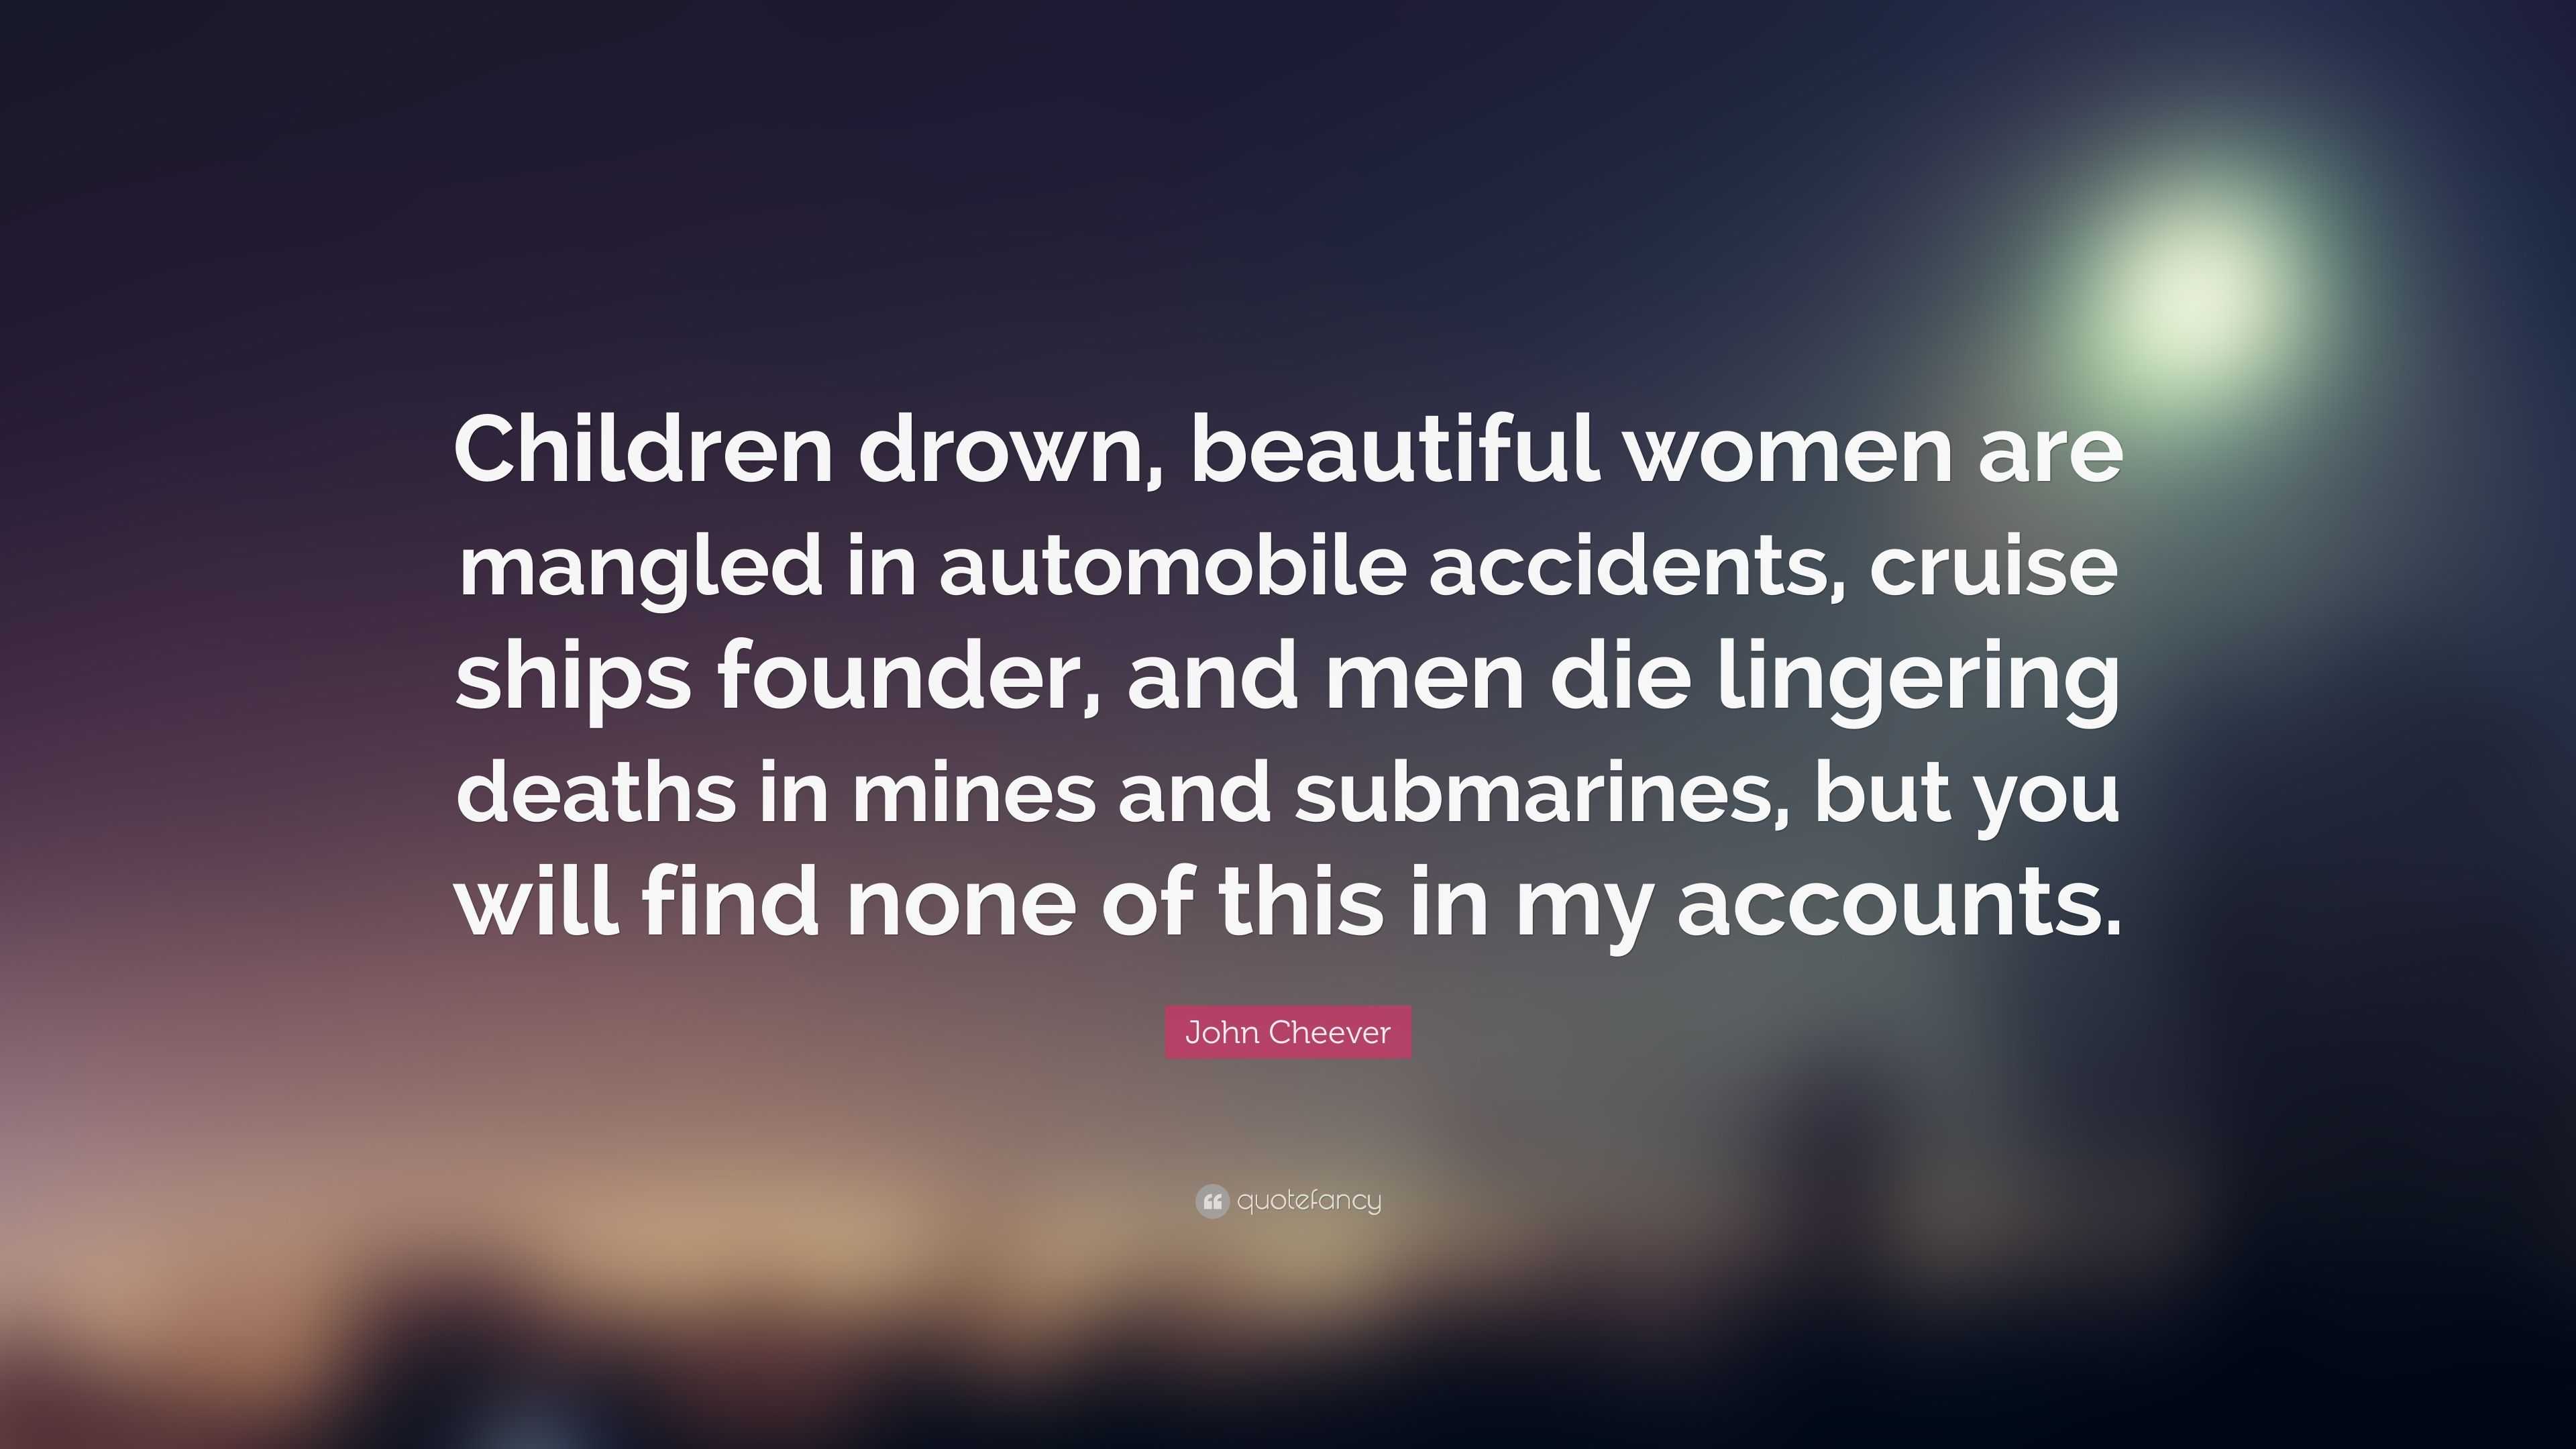 John Cheever Quote: “Children drown, beautiful women are mangled in ...